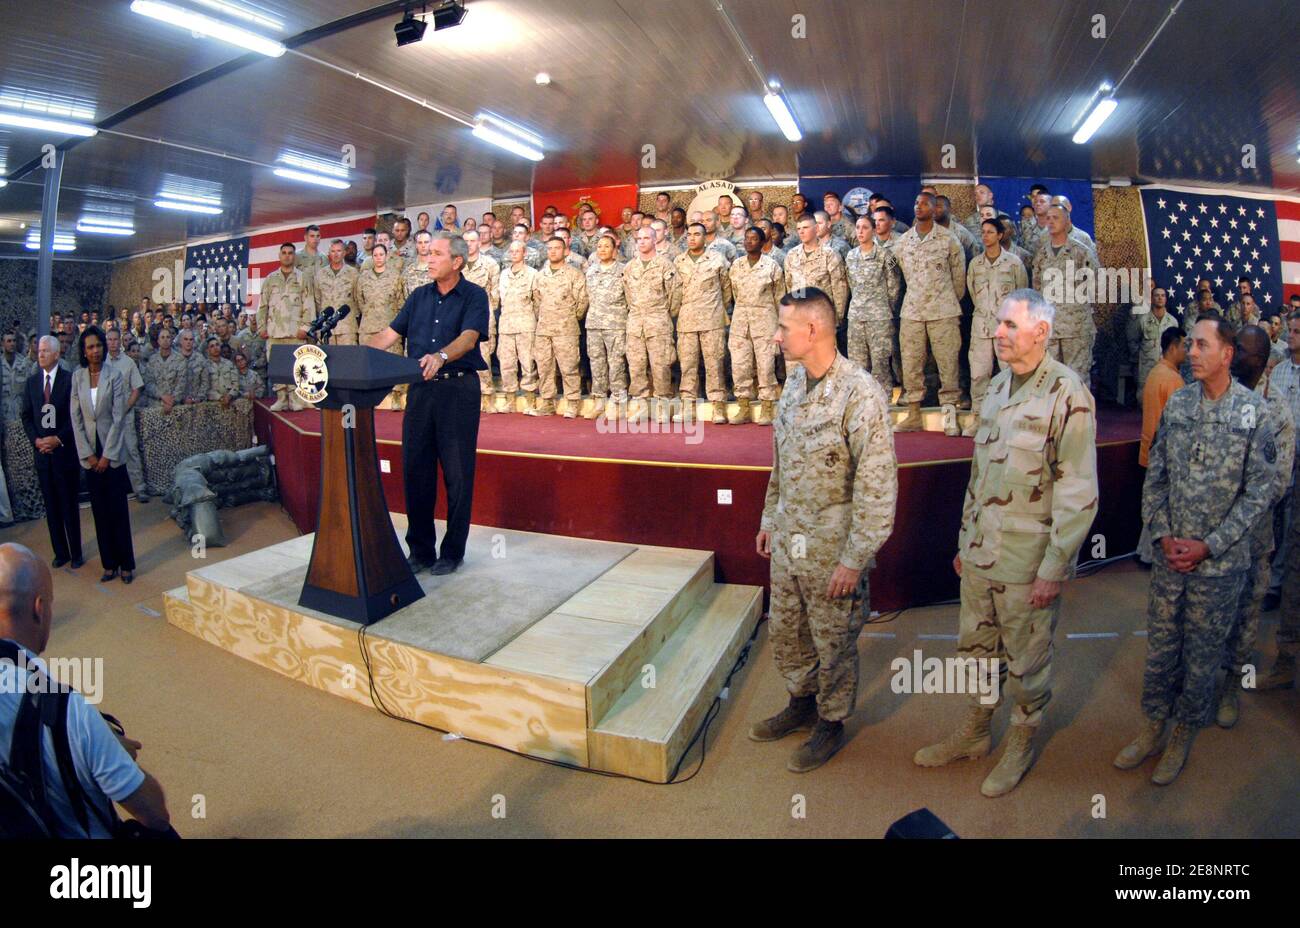 US President George W. Bush delivers his speech to service members during his surprise visit to Al Asad Air Base, Iraq on September 3, 2007. Bush rejected intensifying pressure from the Democratic-led Congress to start pulling troops immediately out of the unpopular war in Iraq. 'Those decisions will be based on a calm assessment by our military commanders on the conditions on the ground, not a nervous reaction by Washington politicians to poll results in the media,' the president said. Photo by DOD via ABACAPRESS.COM Stock Photo